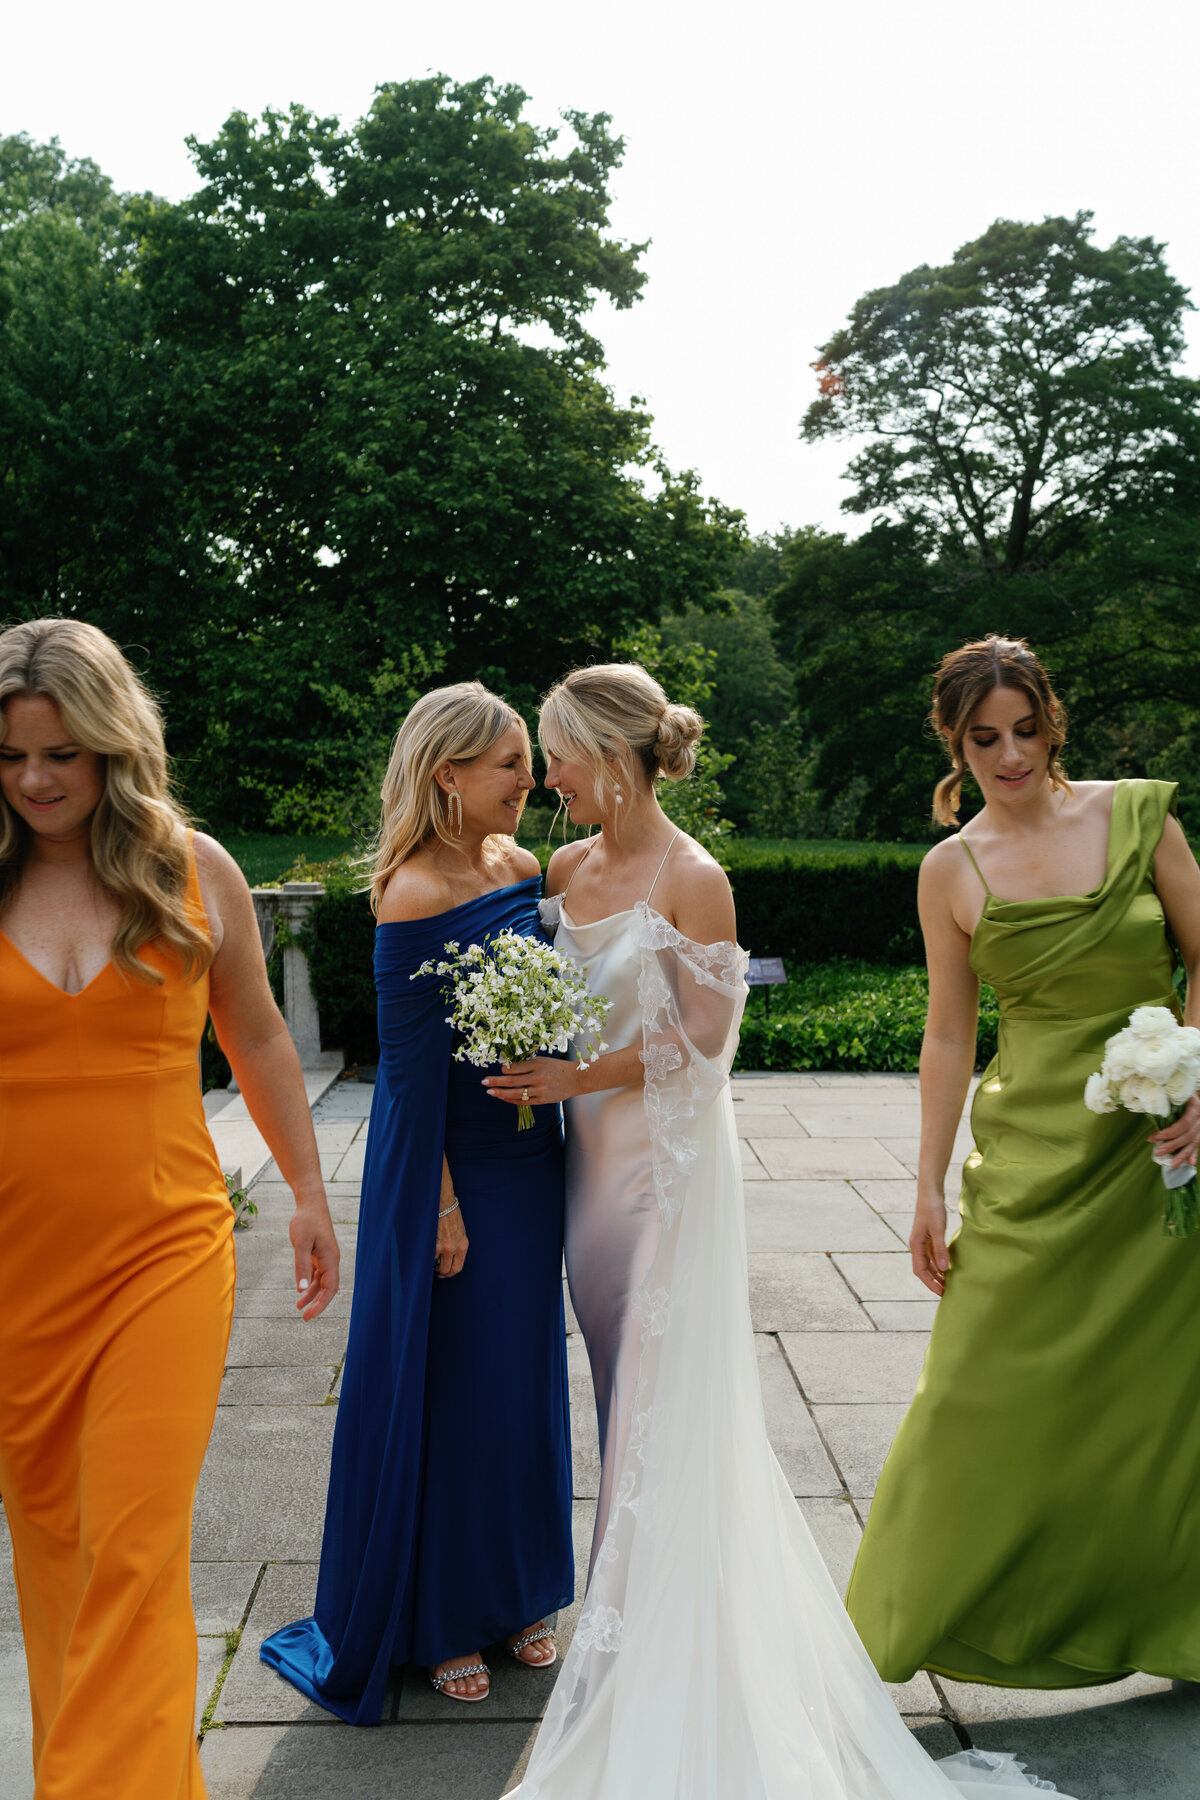 colorful-mother-of-the-bride-gown-mother-daughter-moment-new-england-wedding-planner-sarah-brehant-events